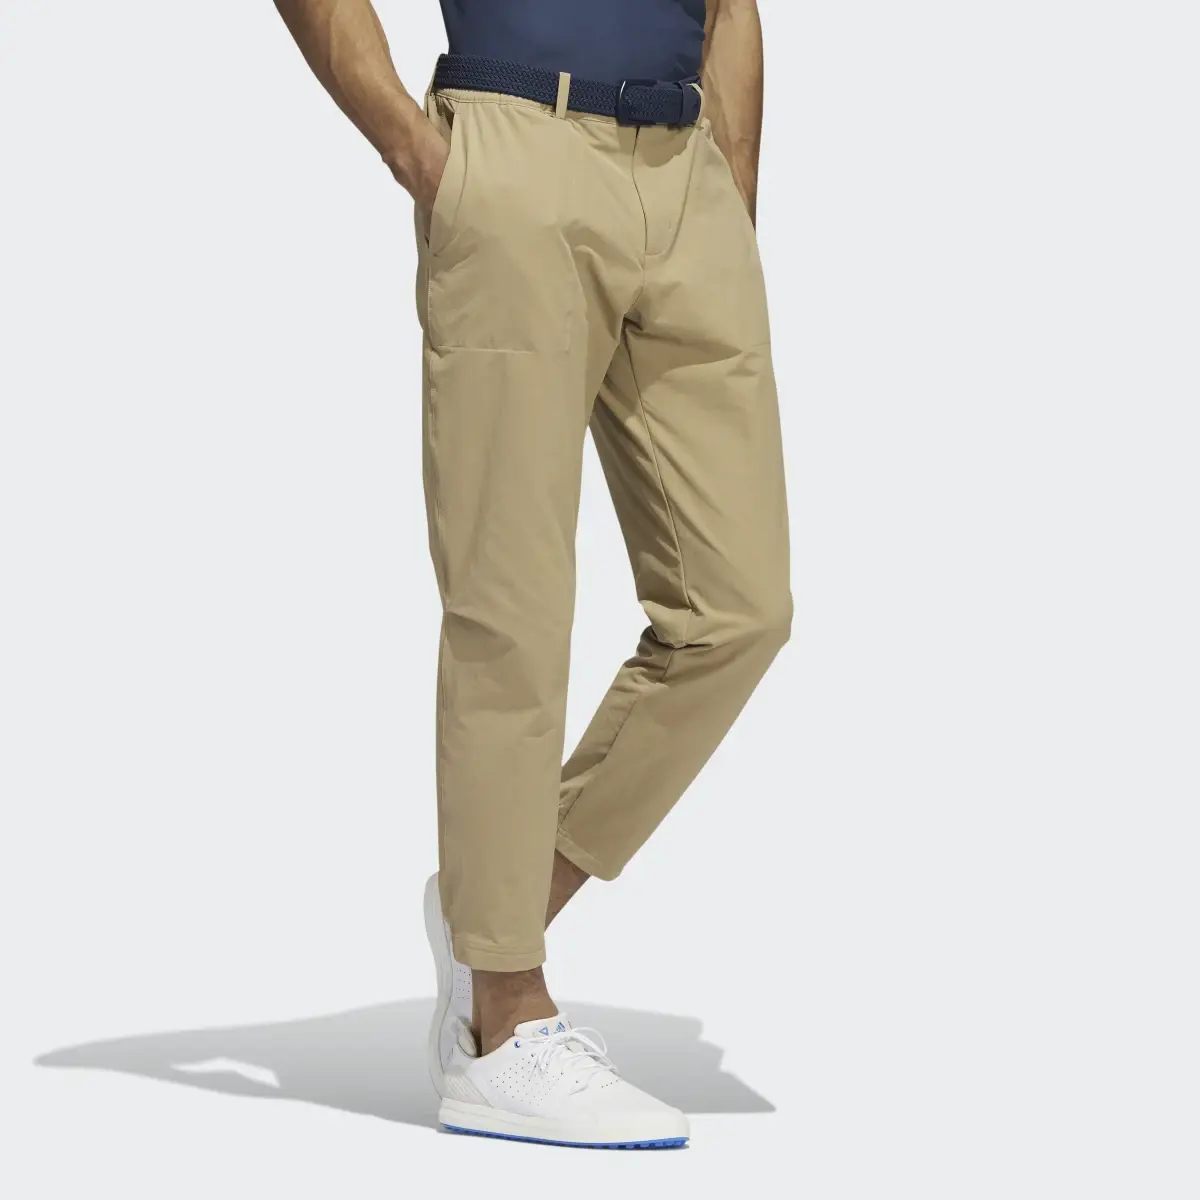 Adidas Go-To Commuter Golf Pants. 3